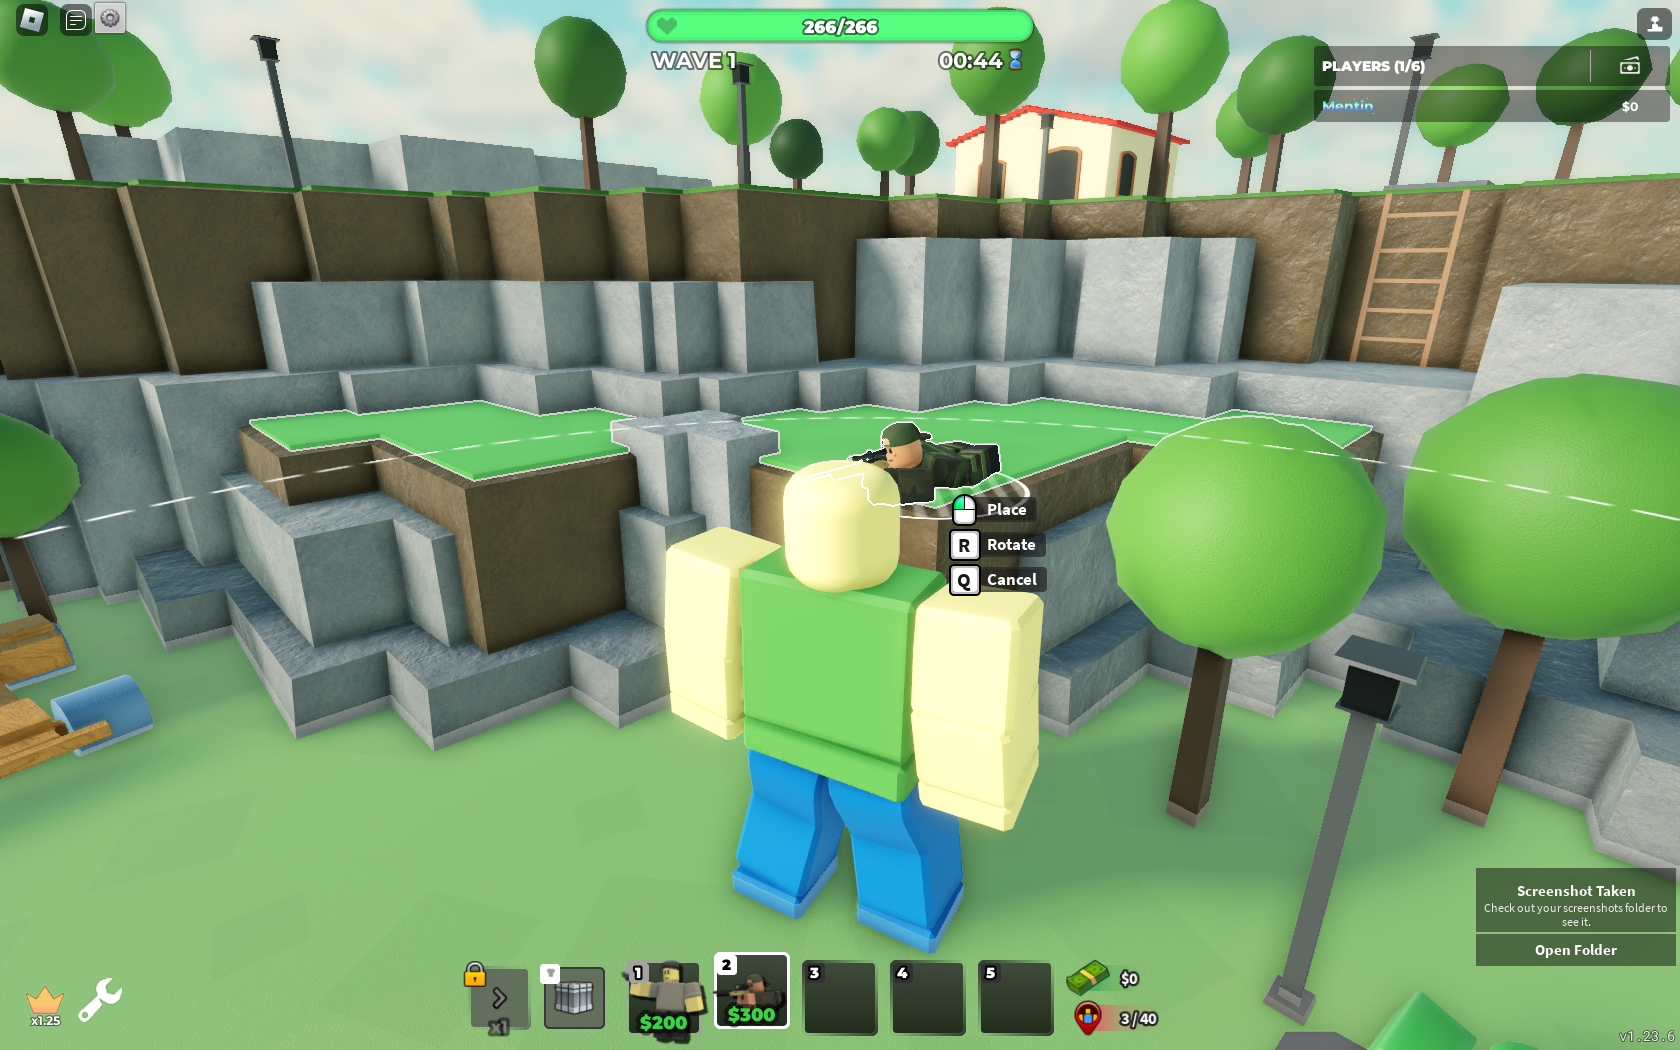 If you play the game all star tower defense and haven't already join this  sub : r/roblox